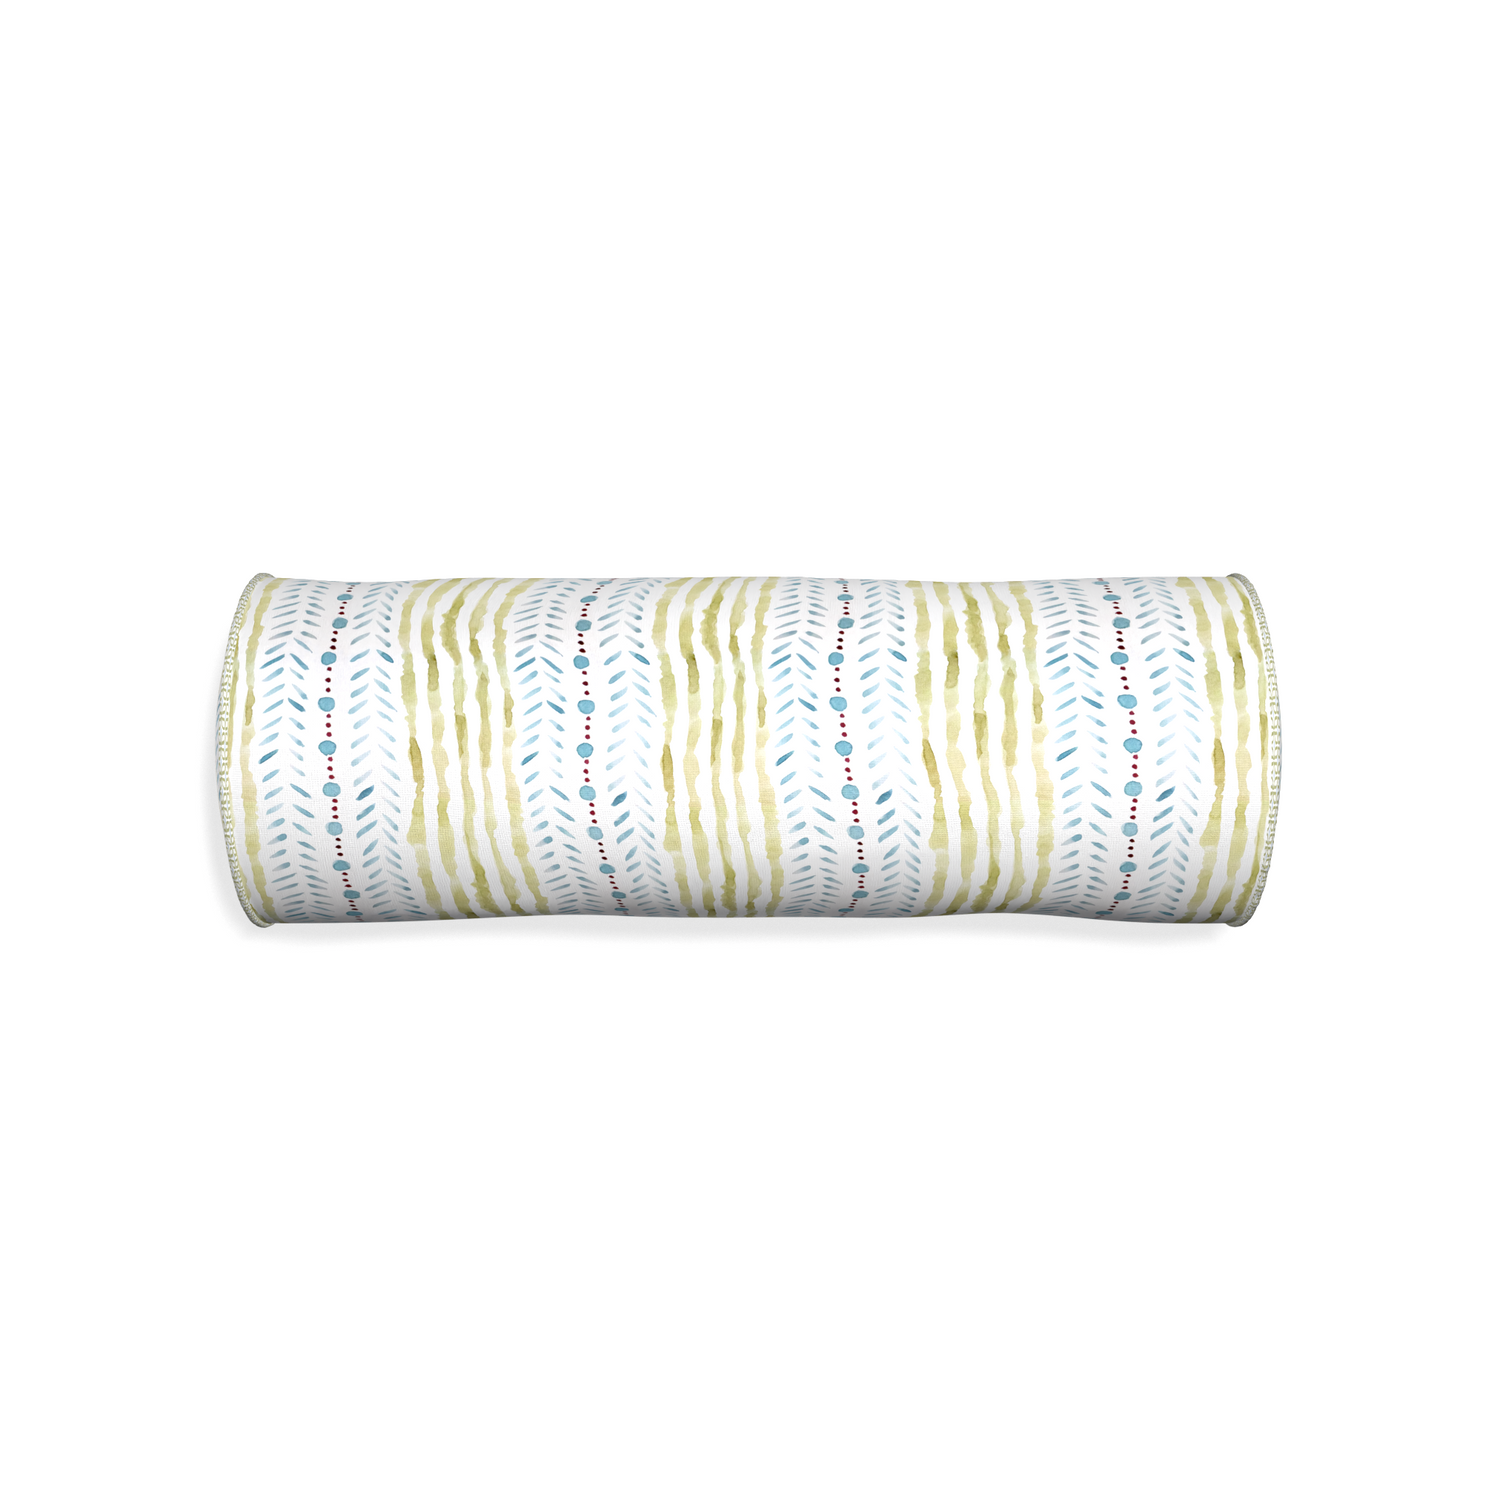 Bolster julia custom blue & green stripedpillow with l piping on white background